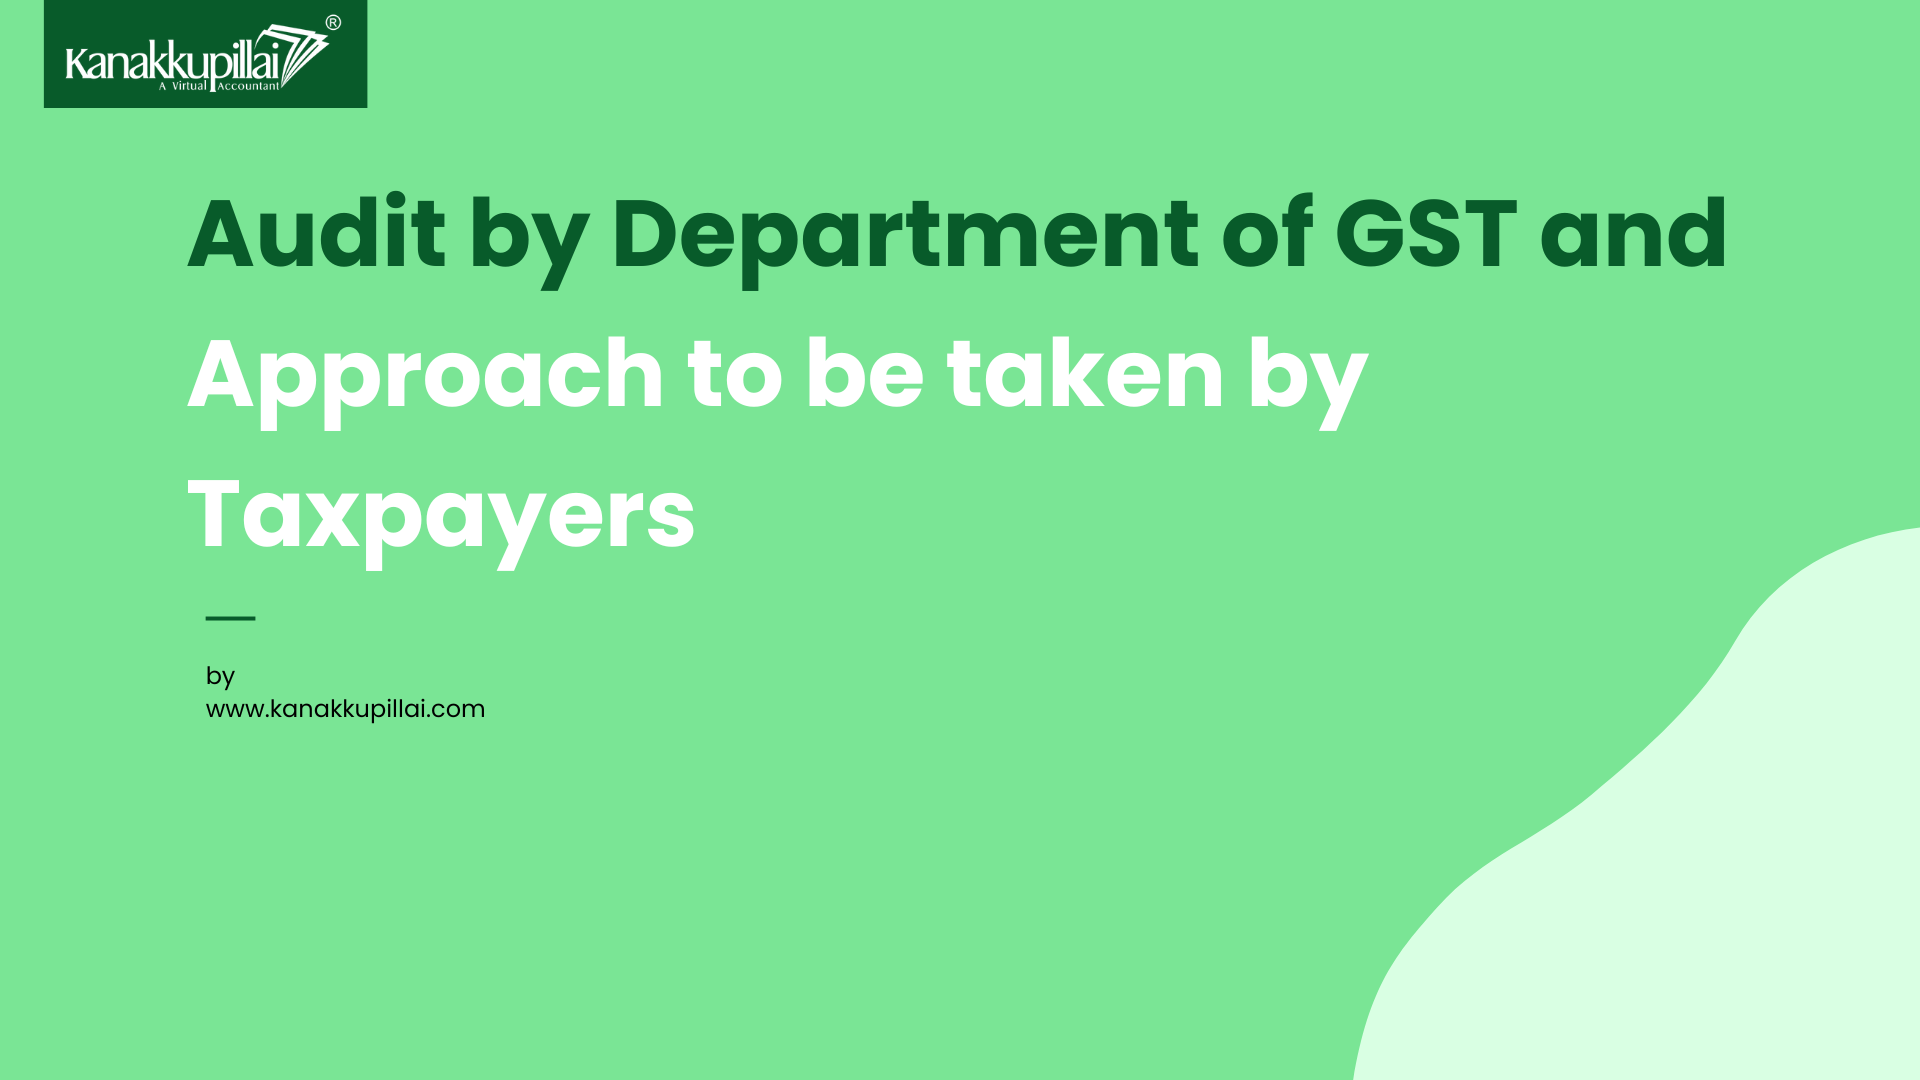 Audit by Department of GST and approach to be taken by taxpayers